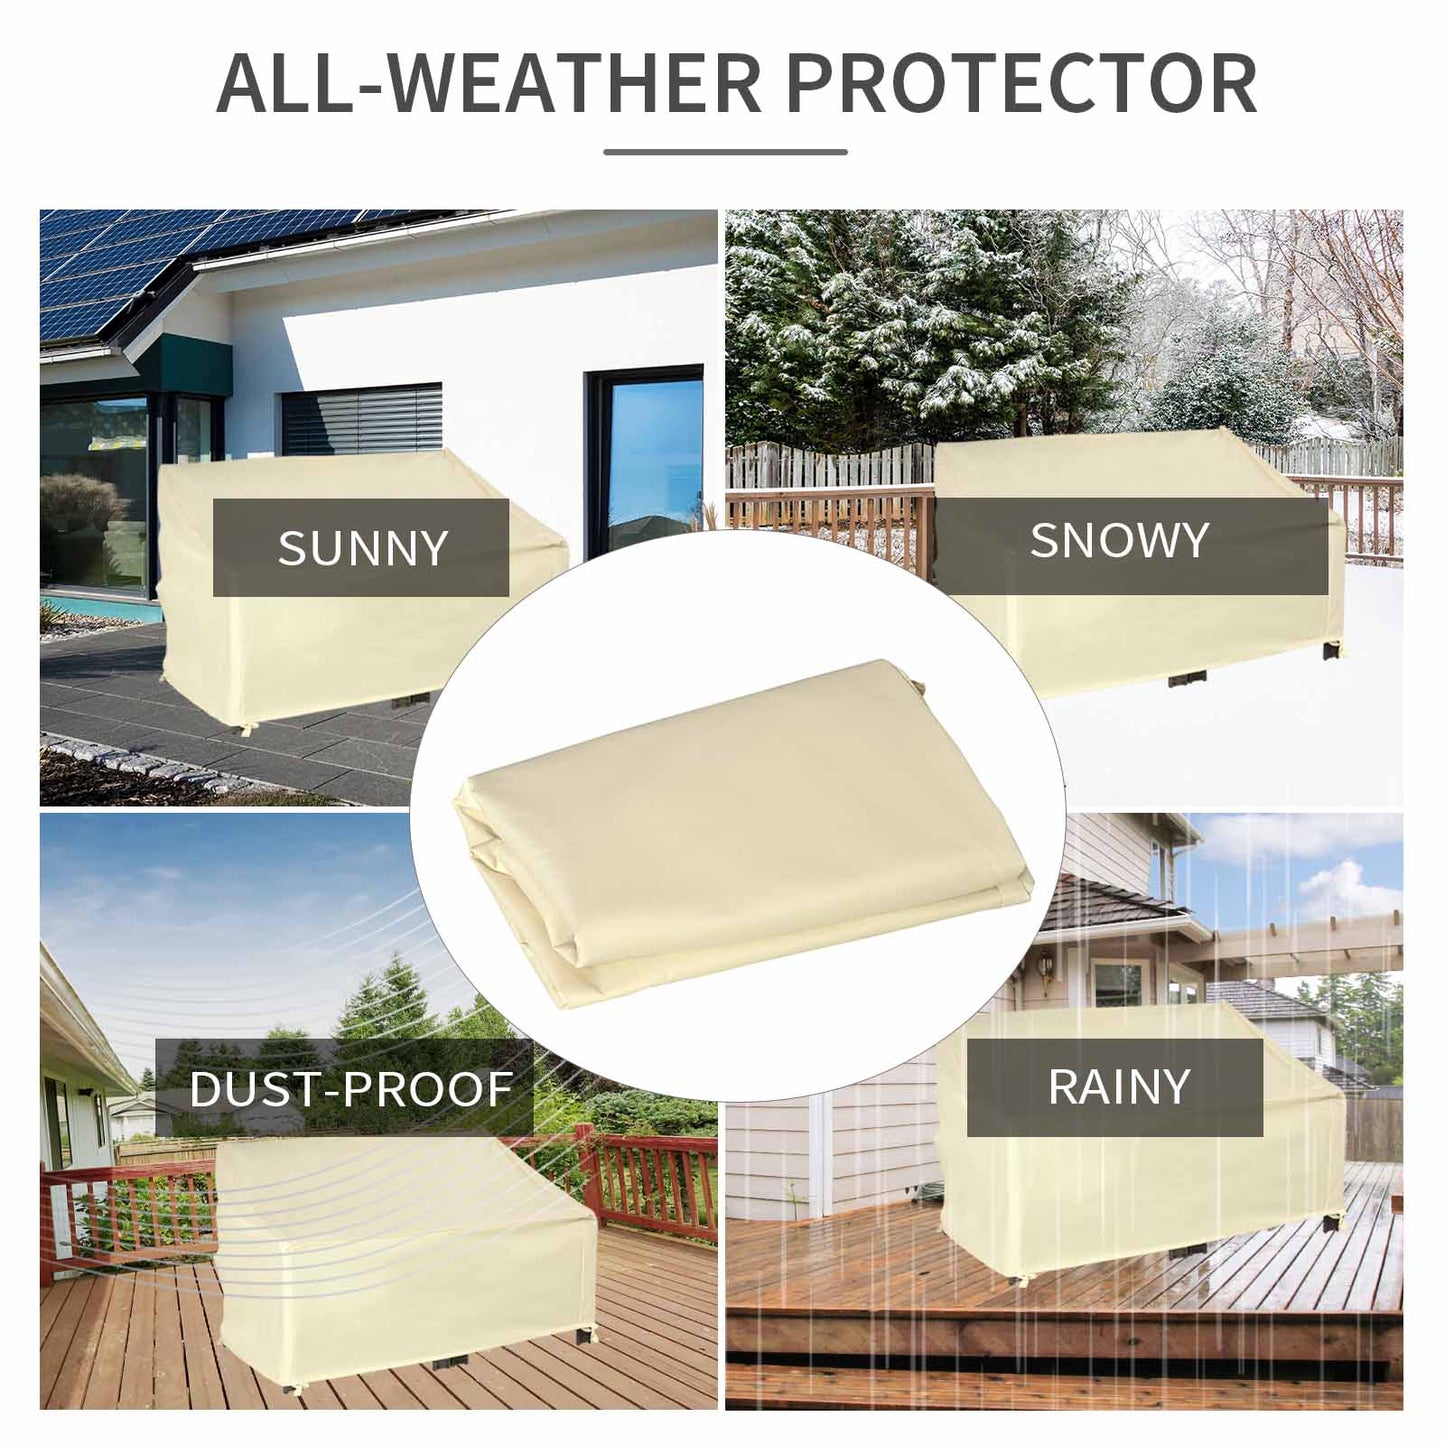 Outsunny Outdoor Furniture Cover 2 Seater Loveseat Protection Tough PVC Lining Wind Rain Dust UV Waterproof, 140x84x94cm